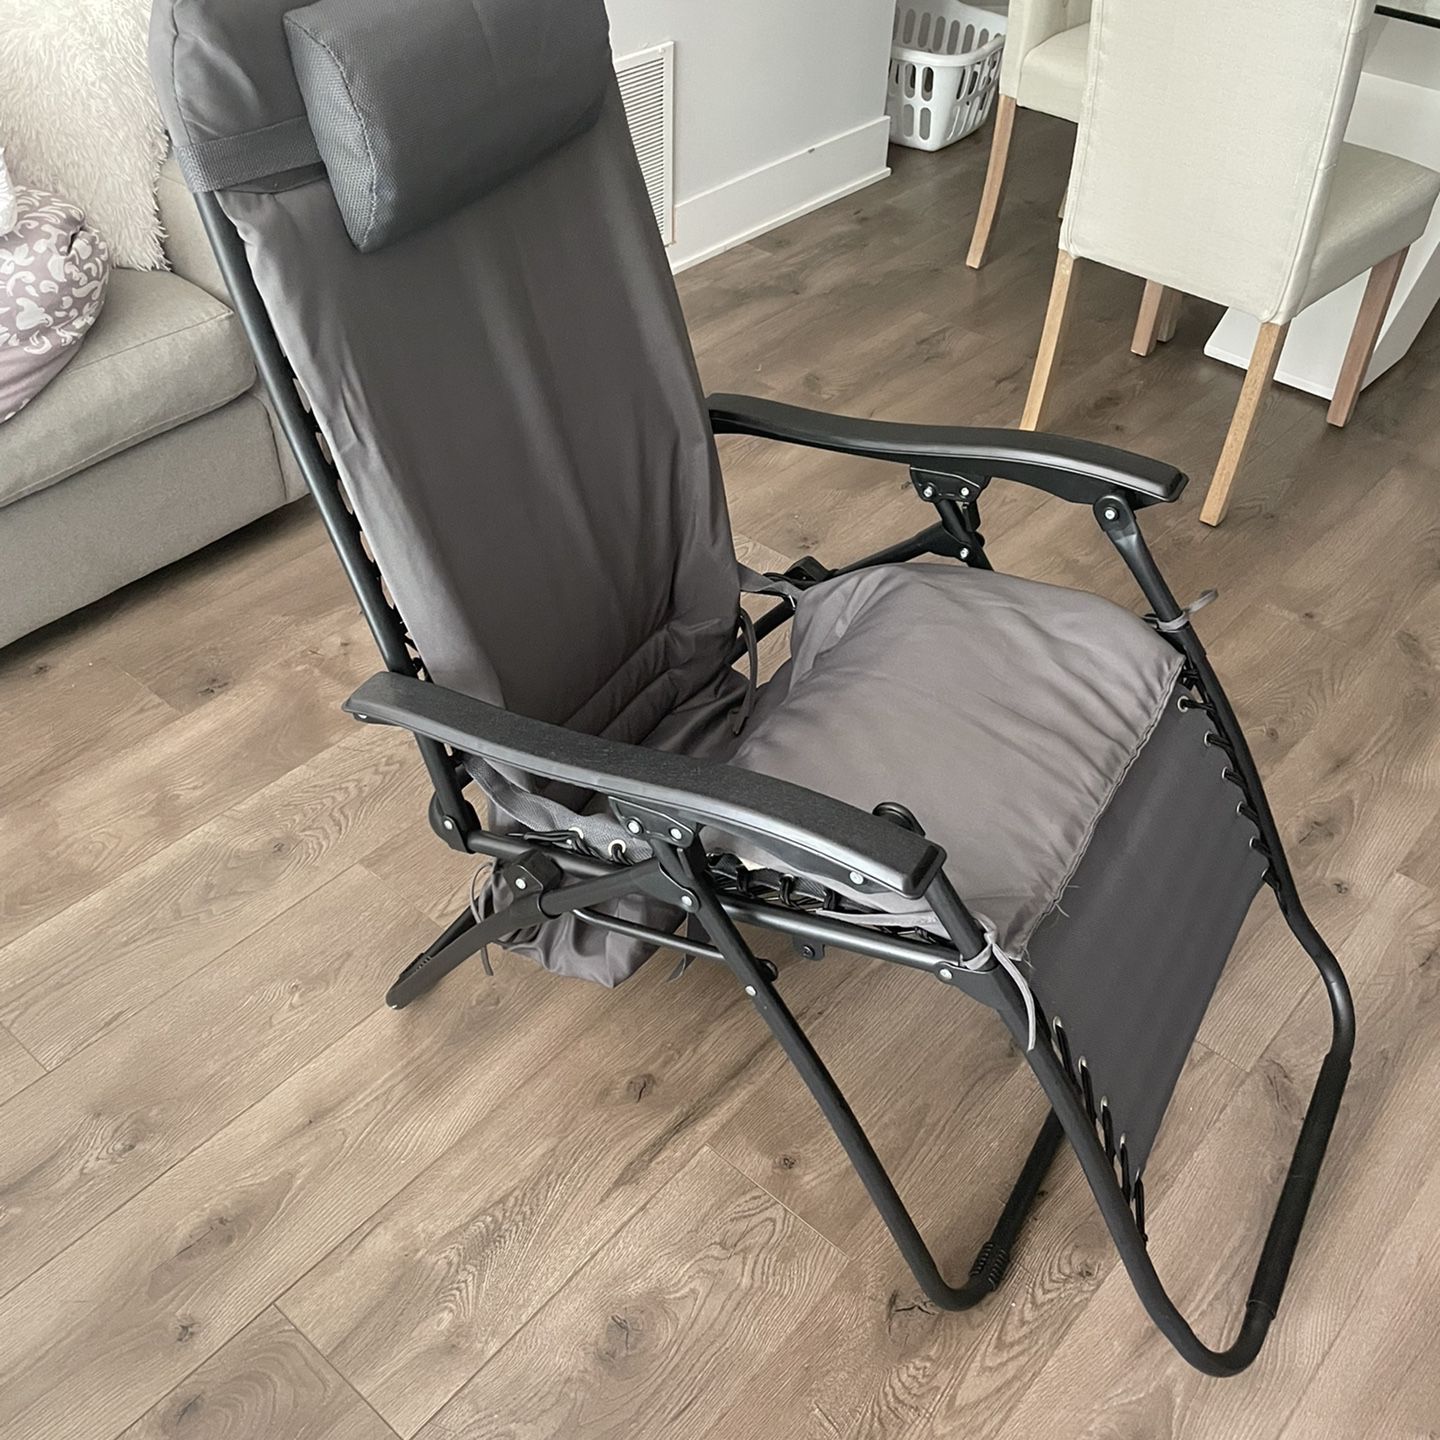 BBL Chair With Butt Hole for Sale in Pembroke Pines, FL - OfferUp